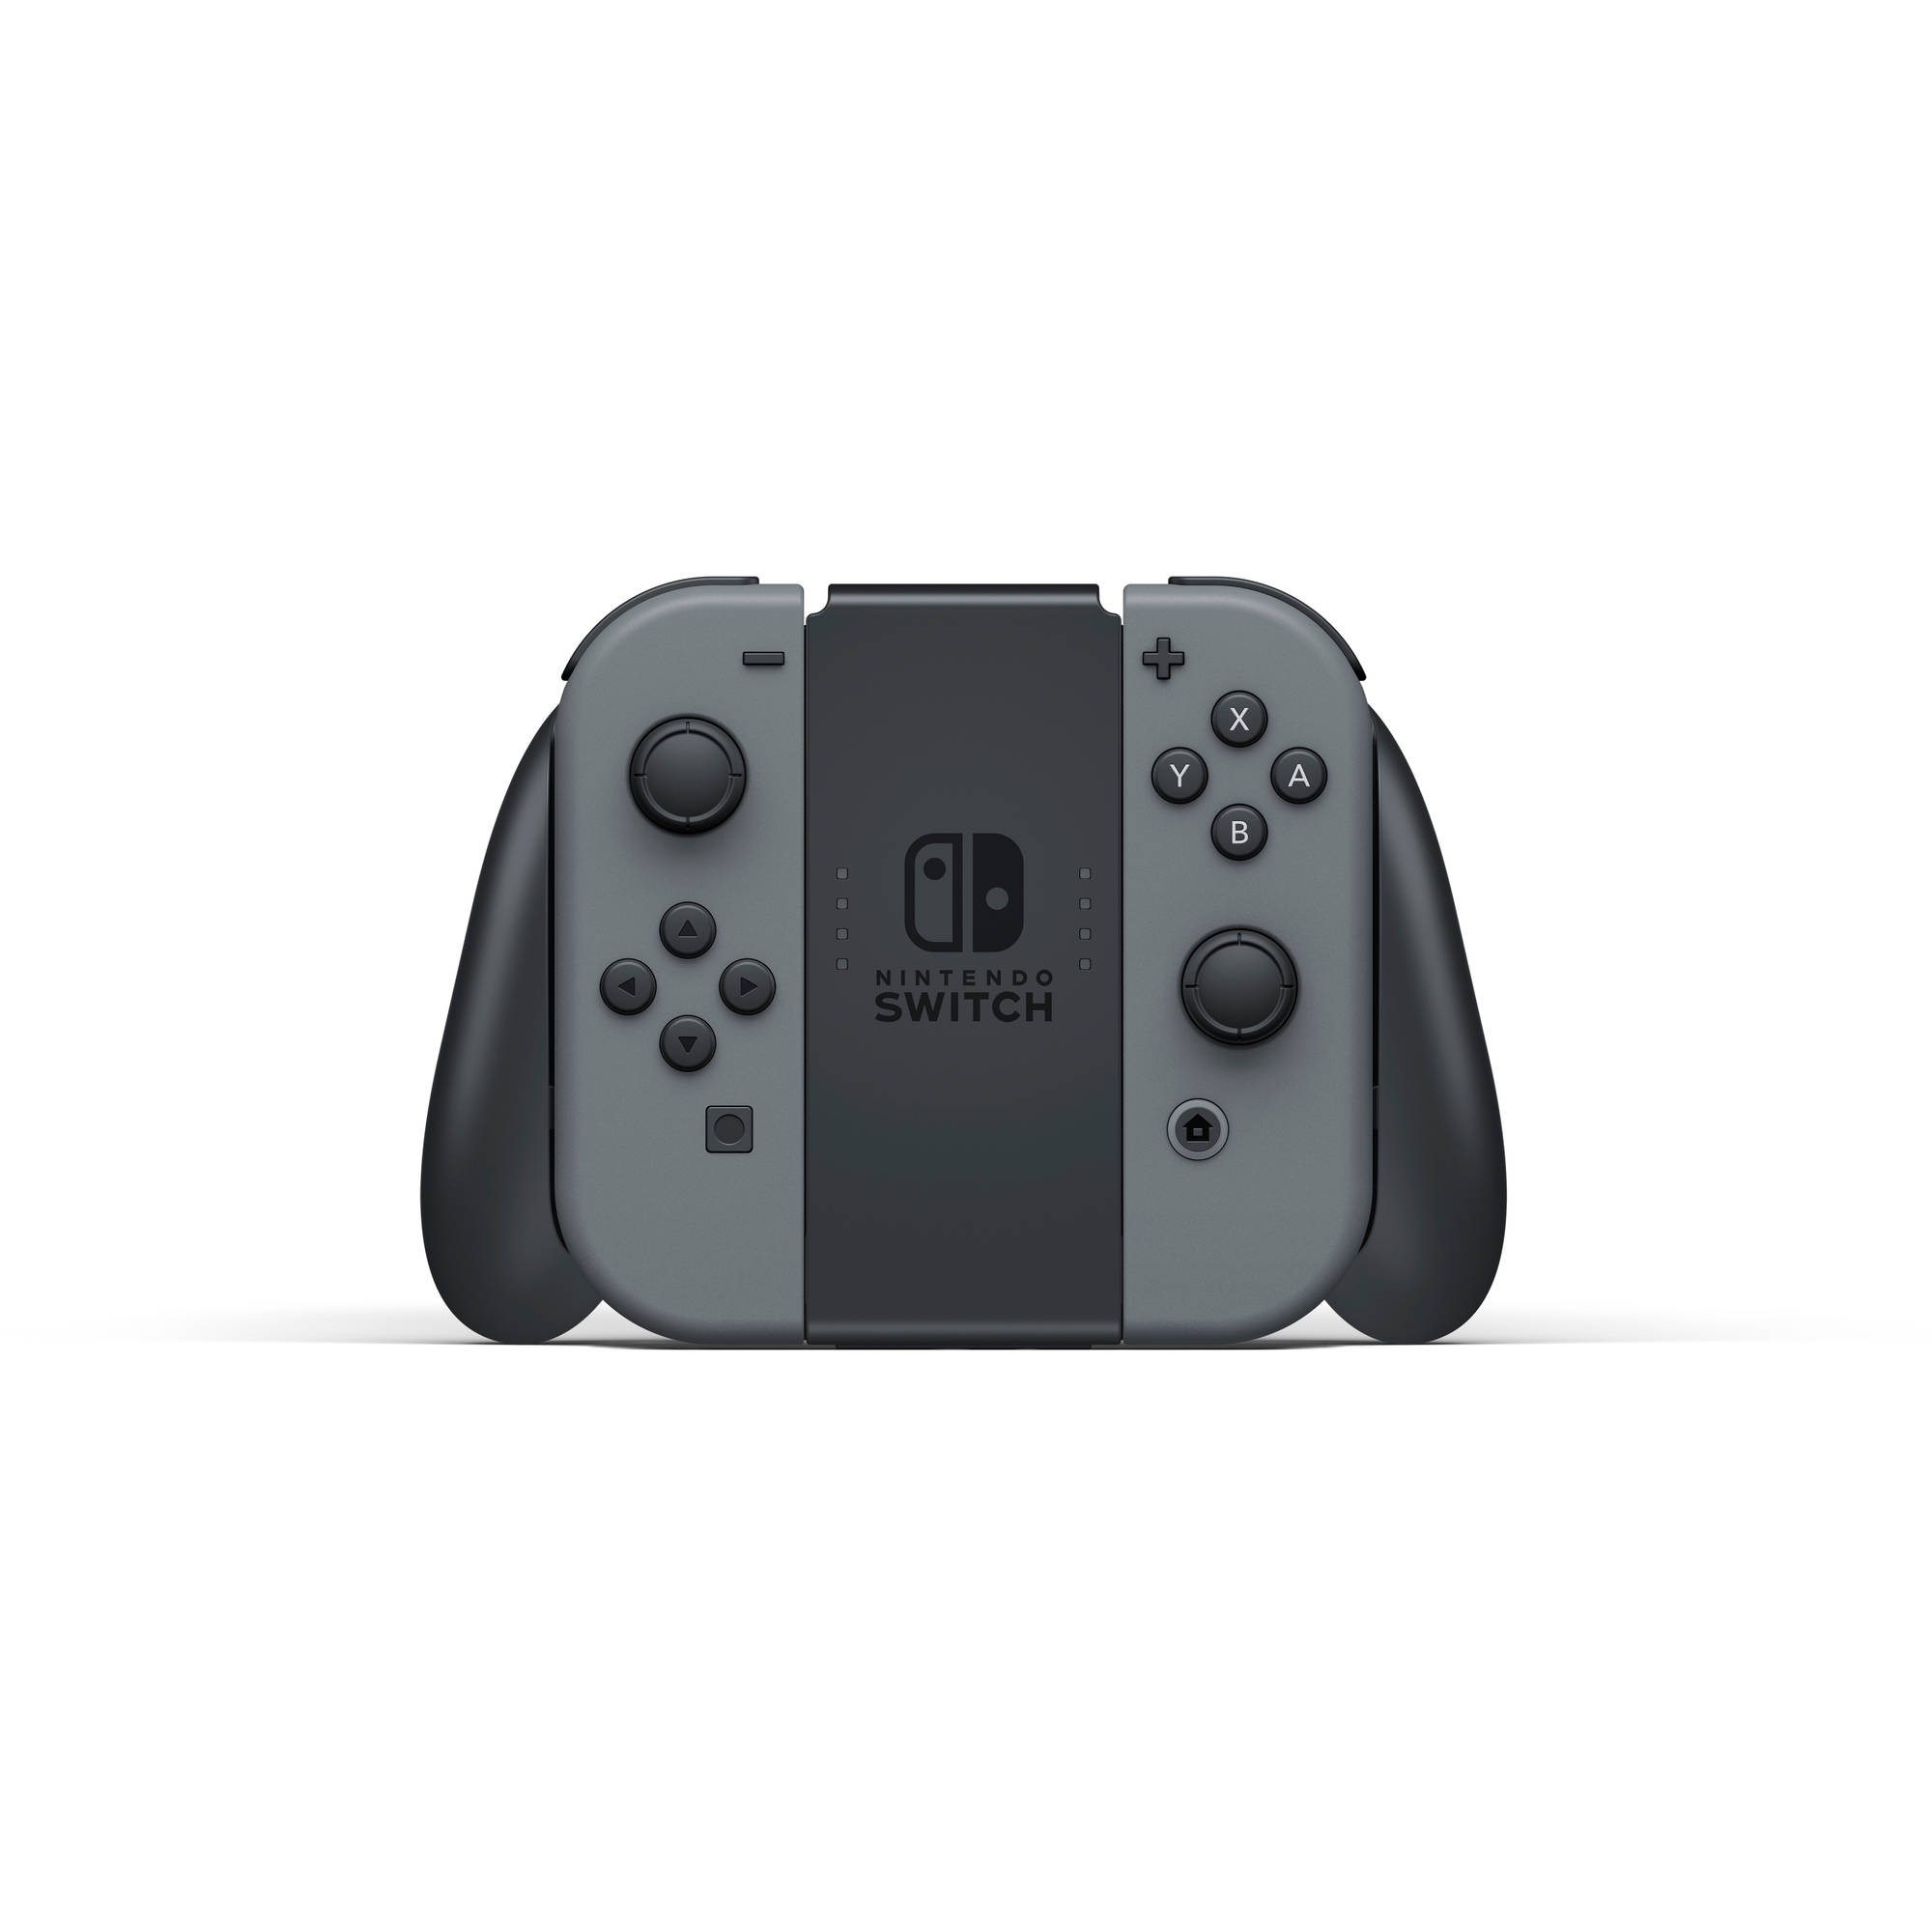 Nintendo Switch Console with Gray Joy-Con (Old Model) - image 3 of 11